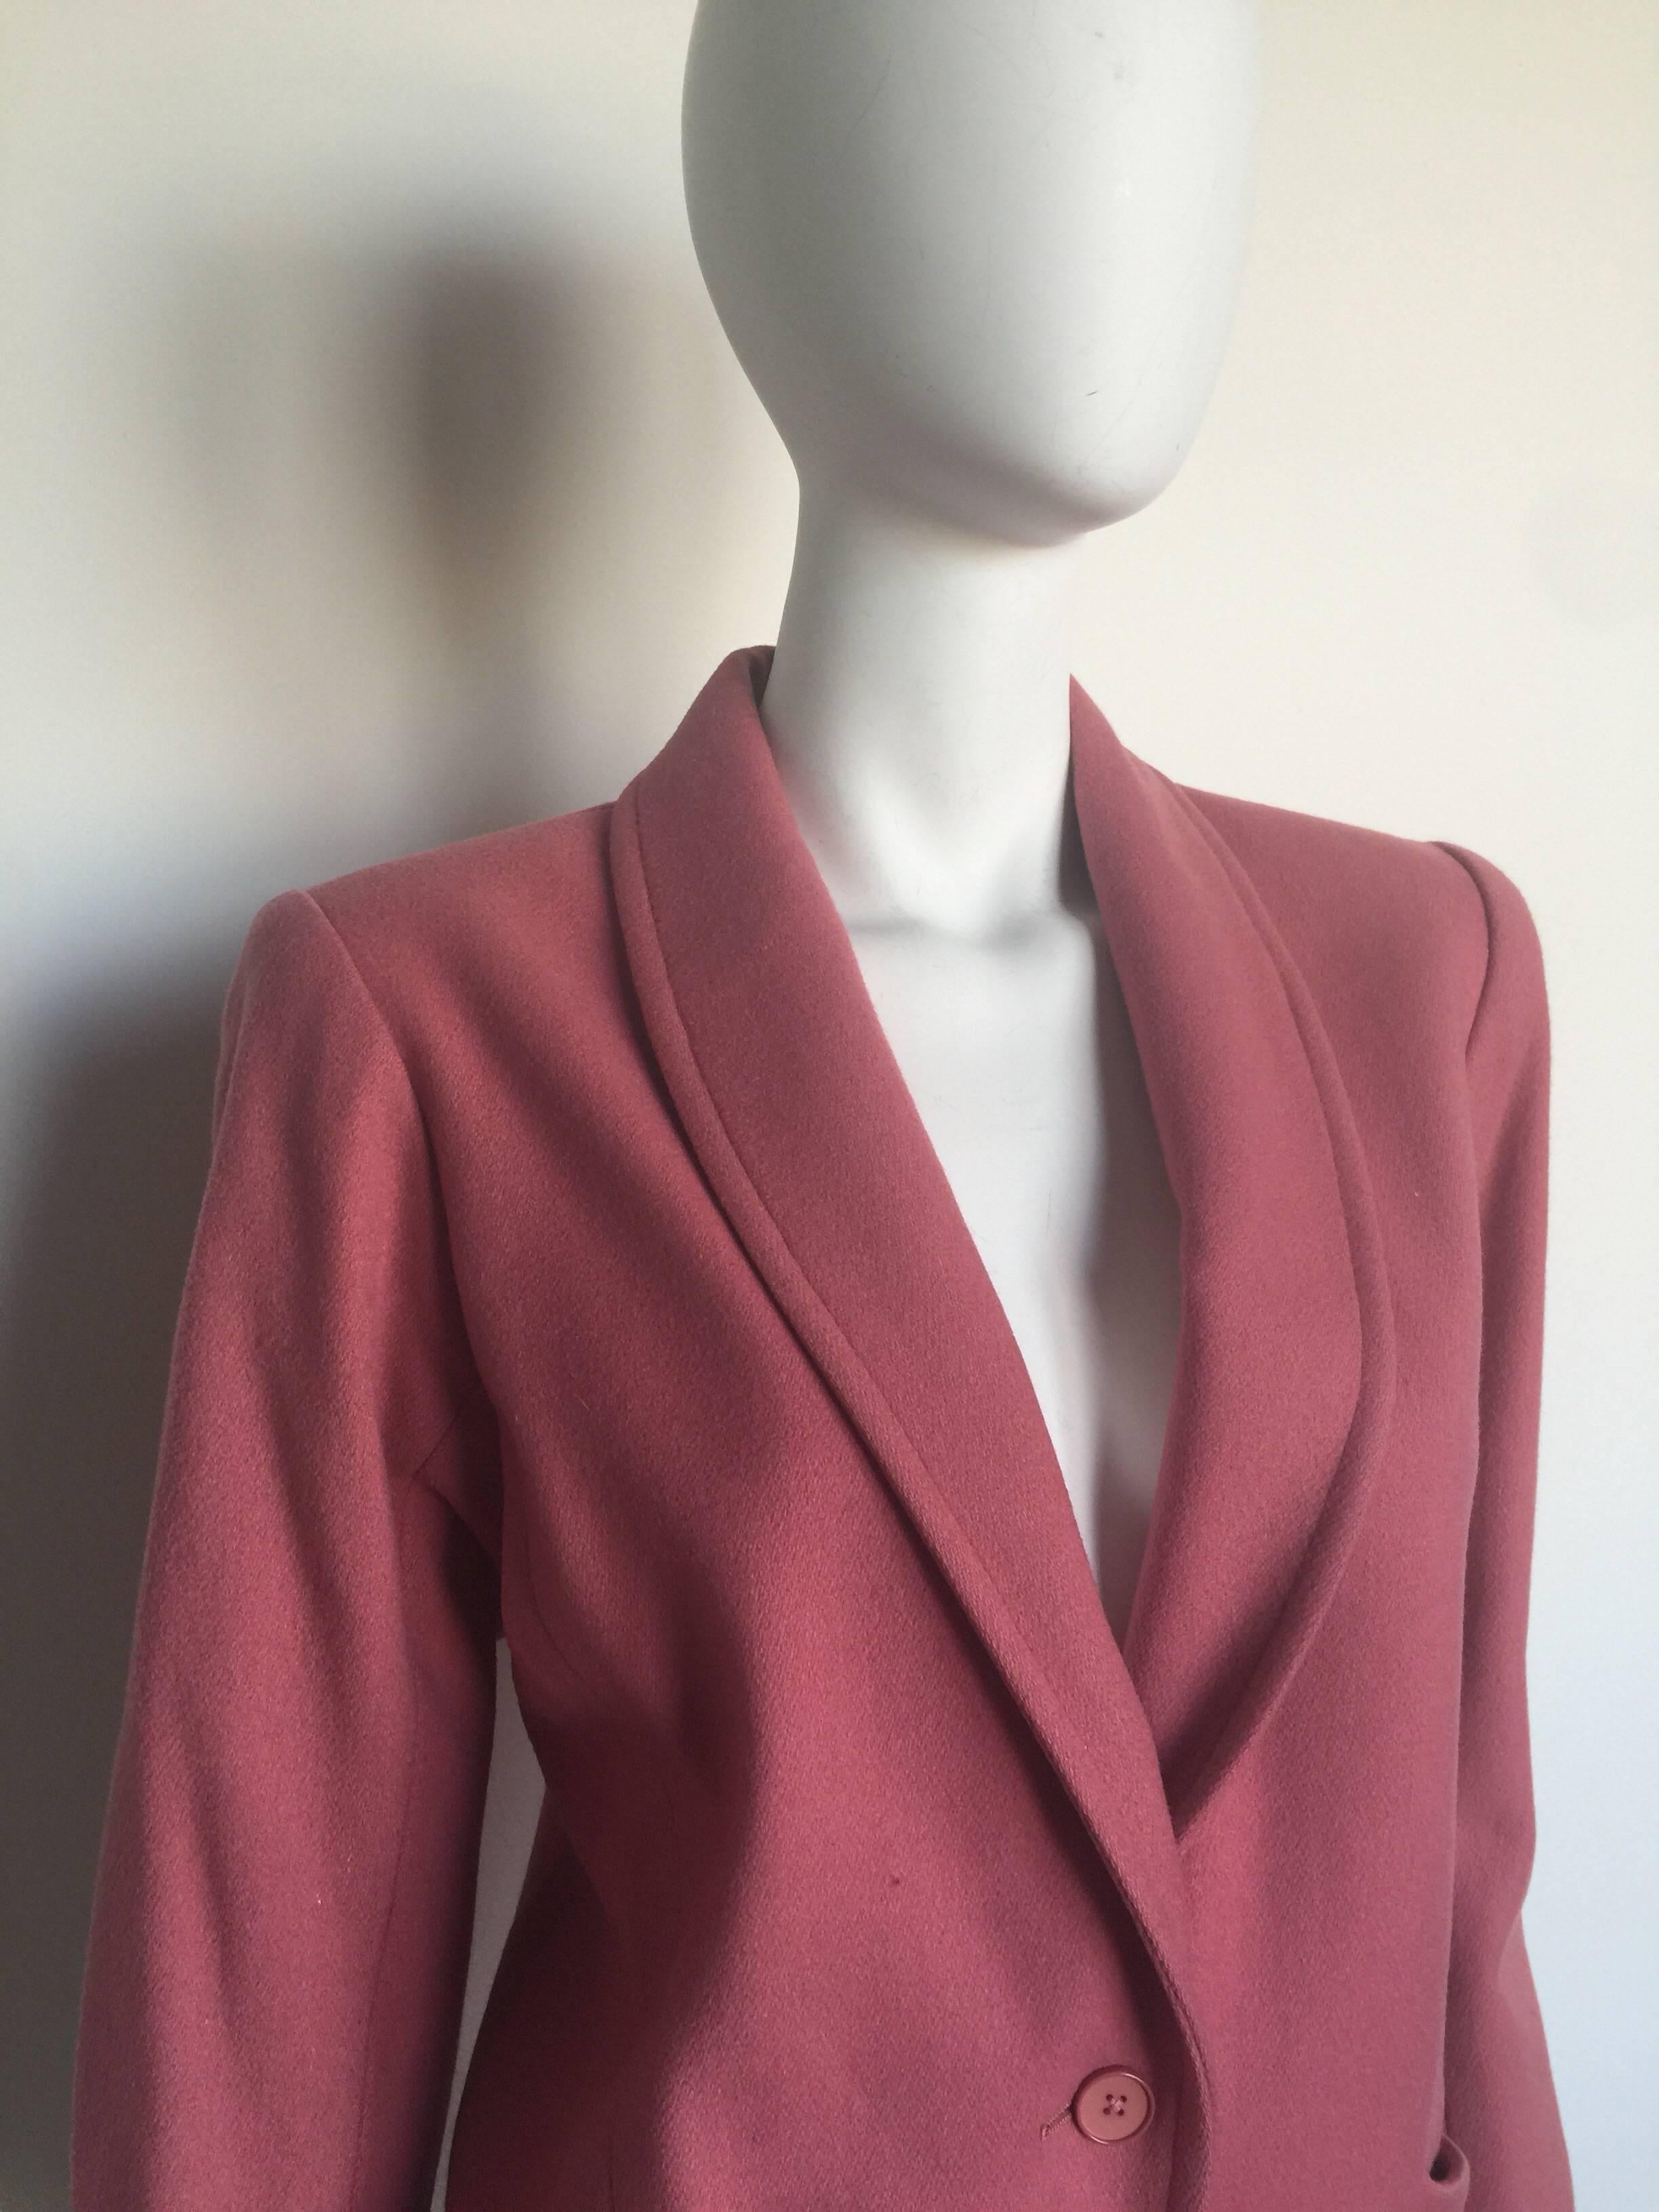 This single breasted blazer is a dusty pink wool blend blazer.  It is in good condition and listed as a size 34 but please refer to measurements and photos.  It has wrap side pockets and small shoulder pads. 